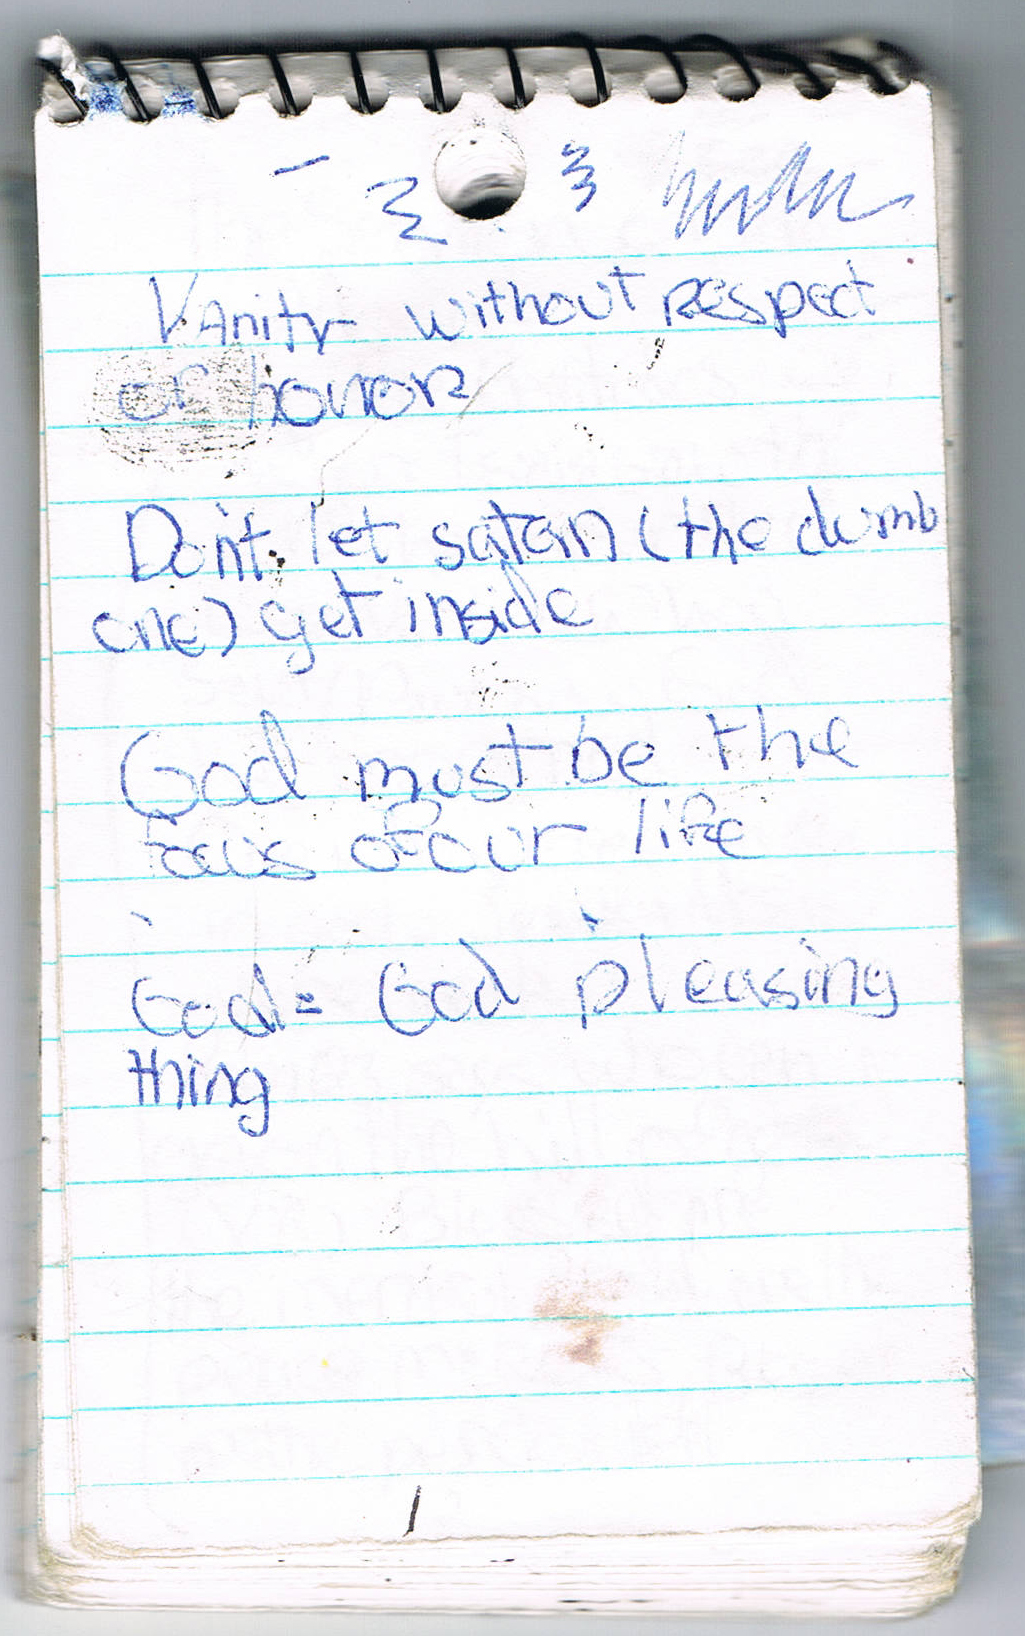 Scan of early sermon notes, in which I label Satan "The Dumb One."